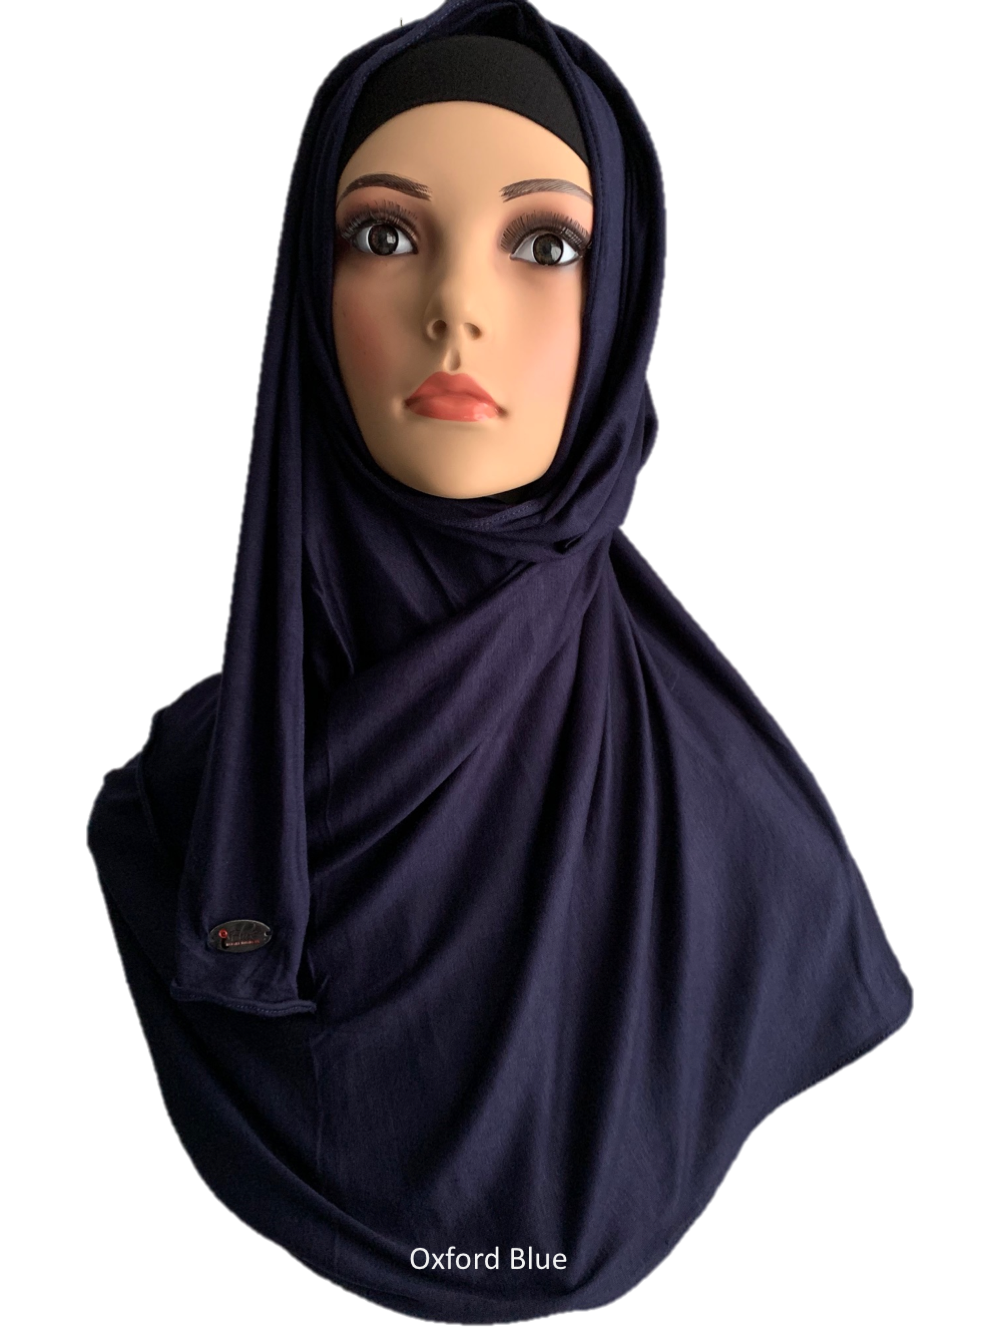 Oxford Blue stretchy (COT) instant hijab SF